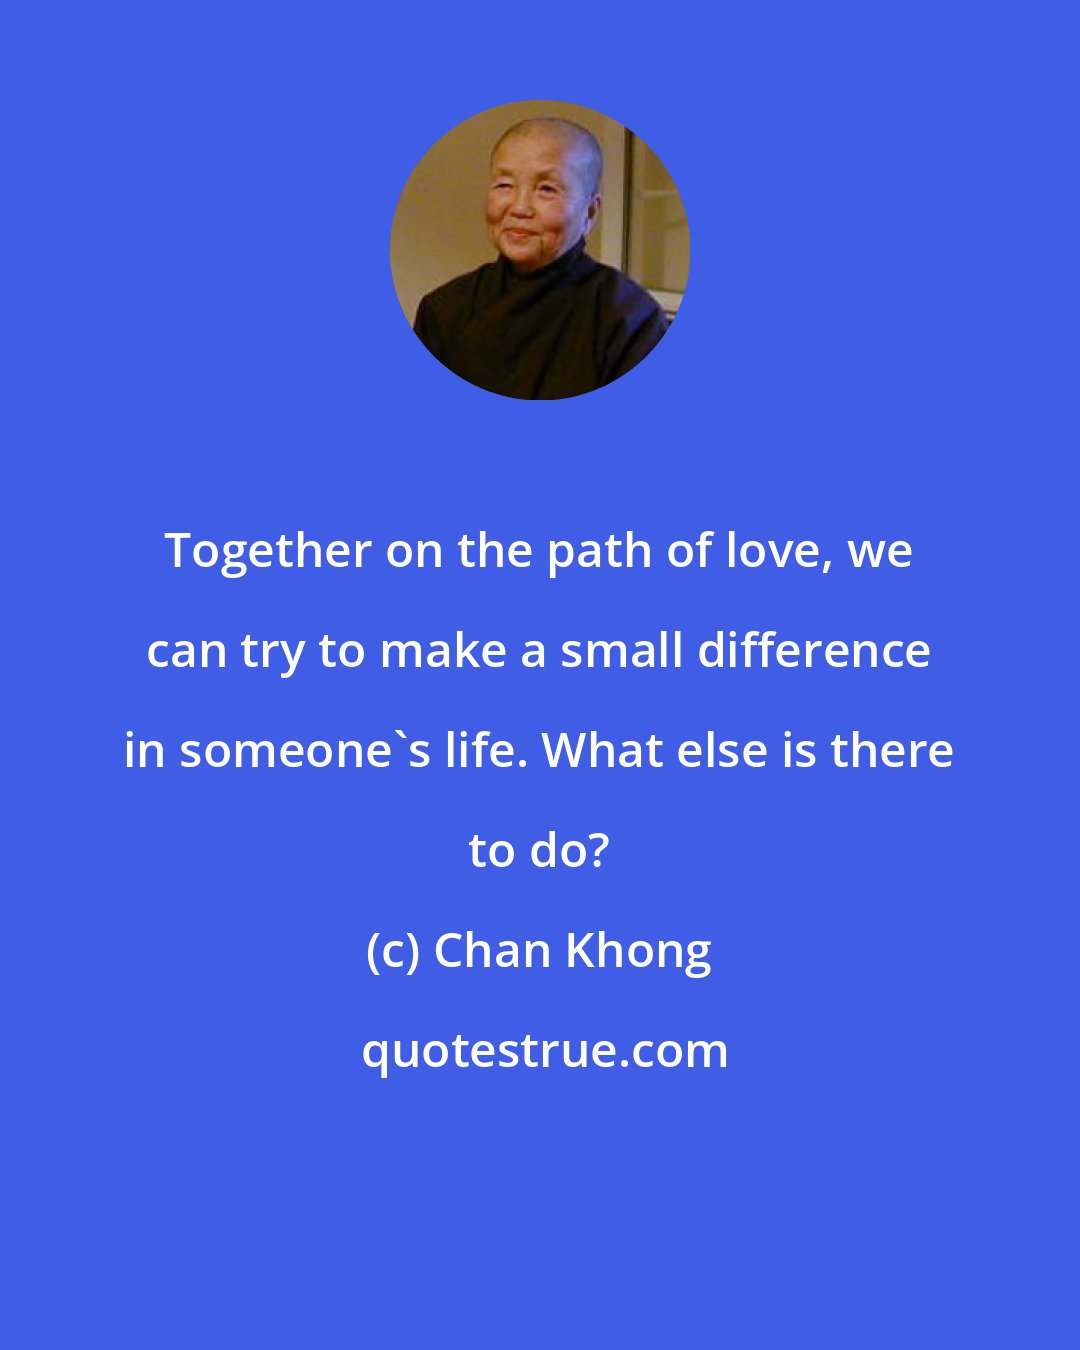 Chan Khong: Together on the path of love, we can try to make a small difference in someone's life. What else is there to do?